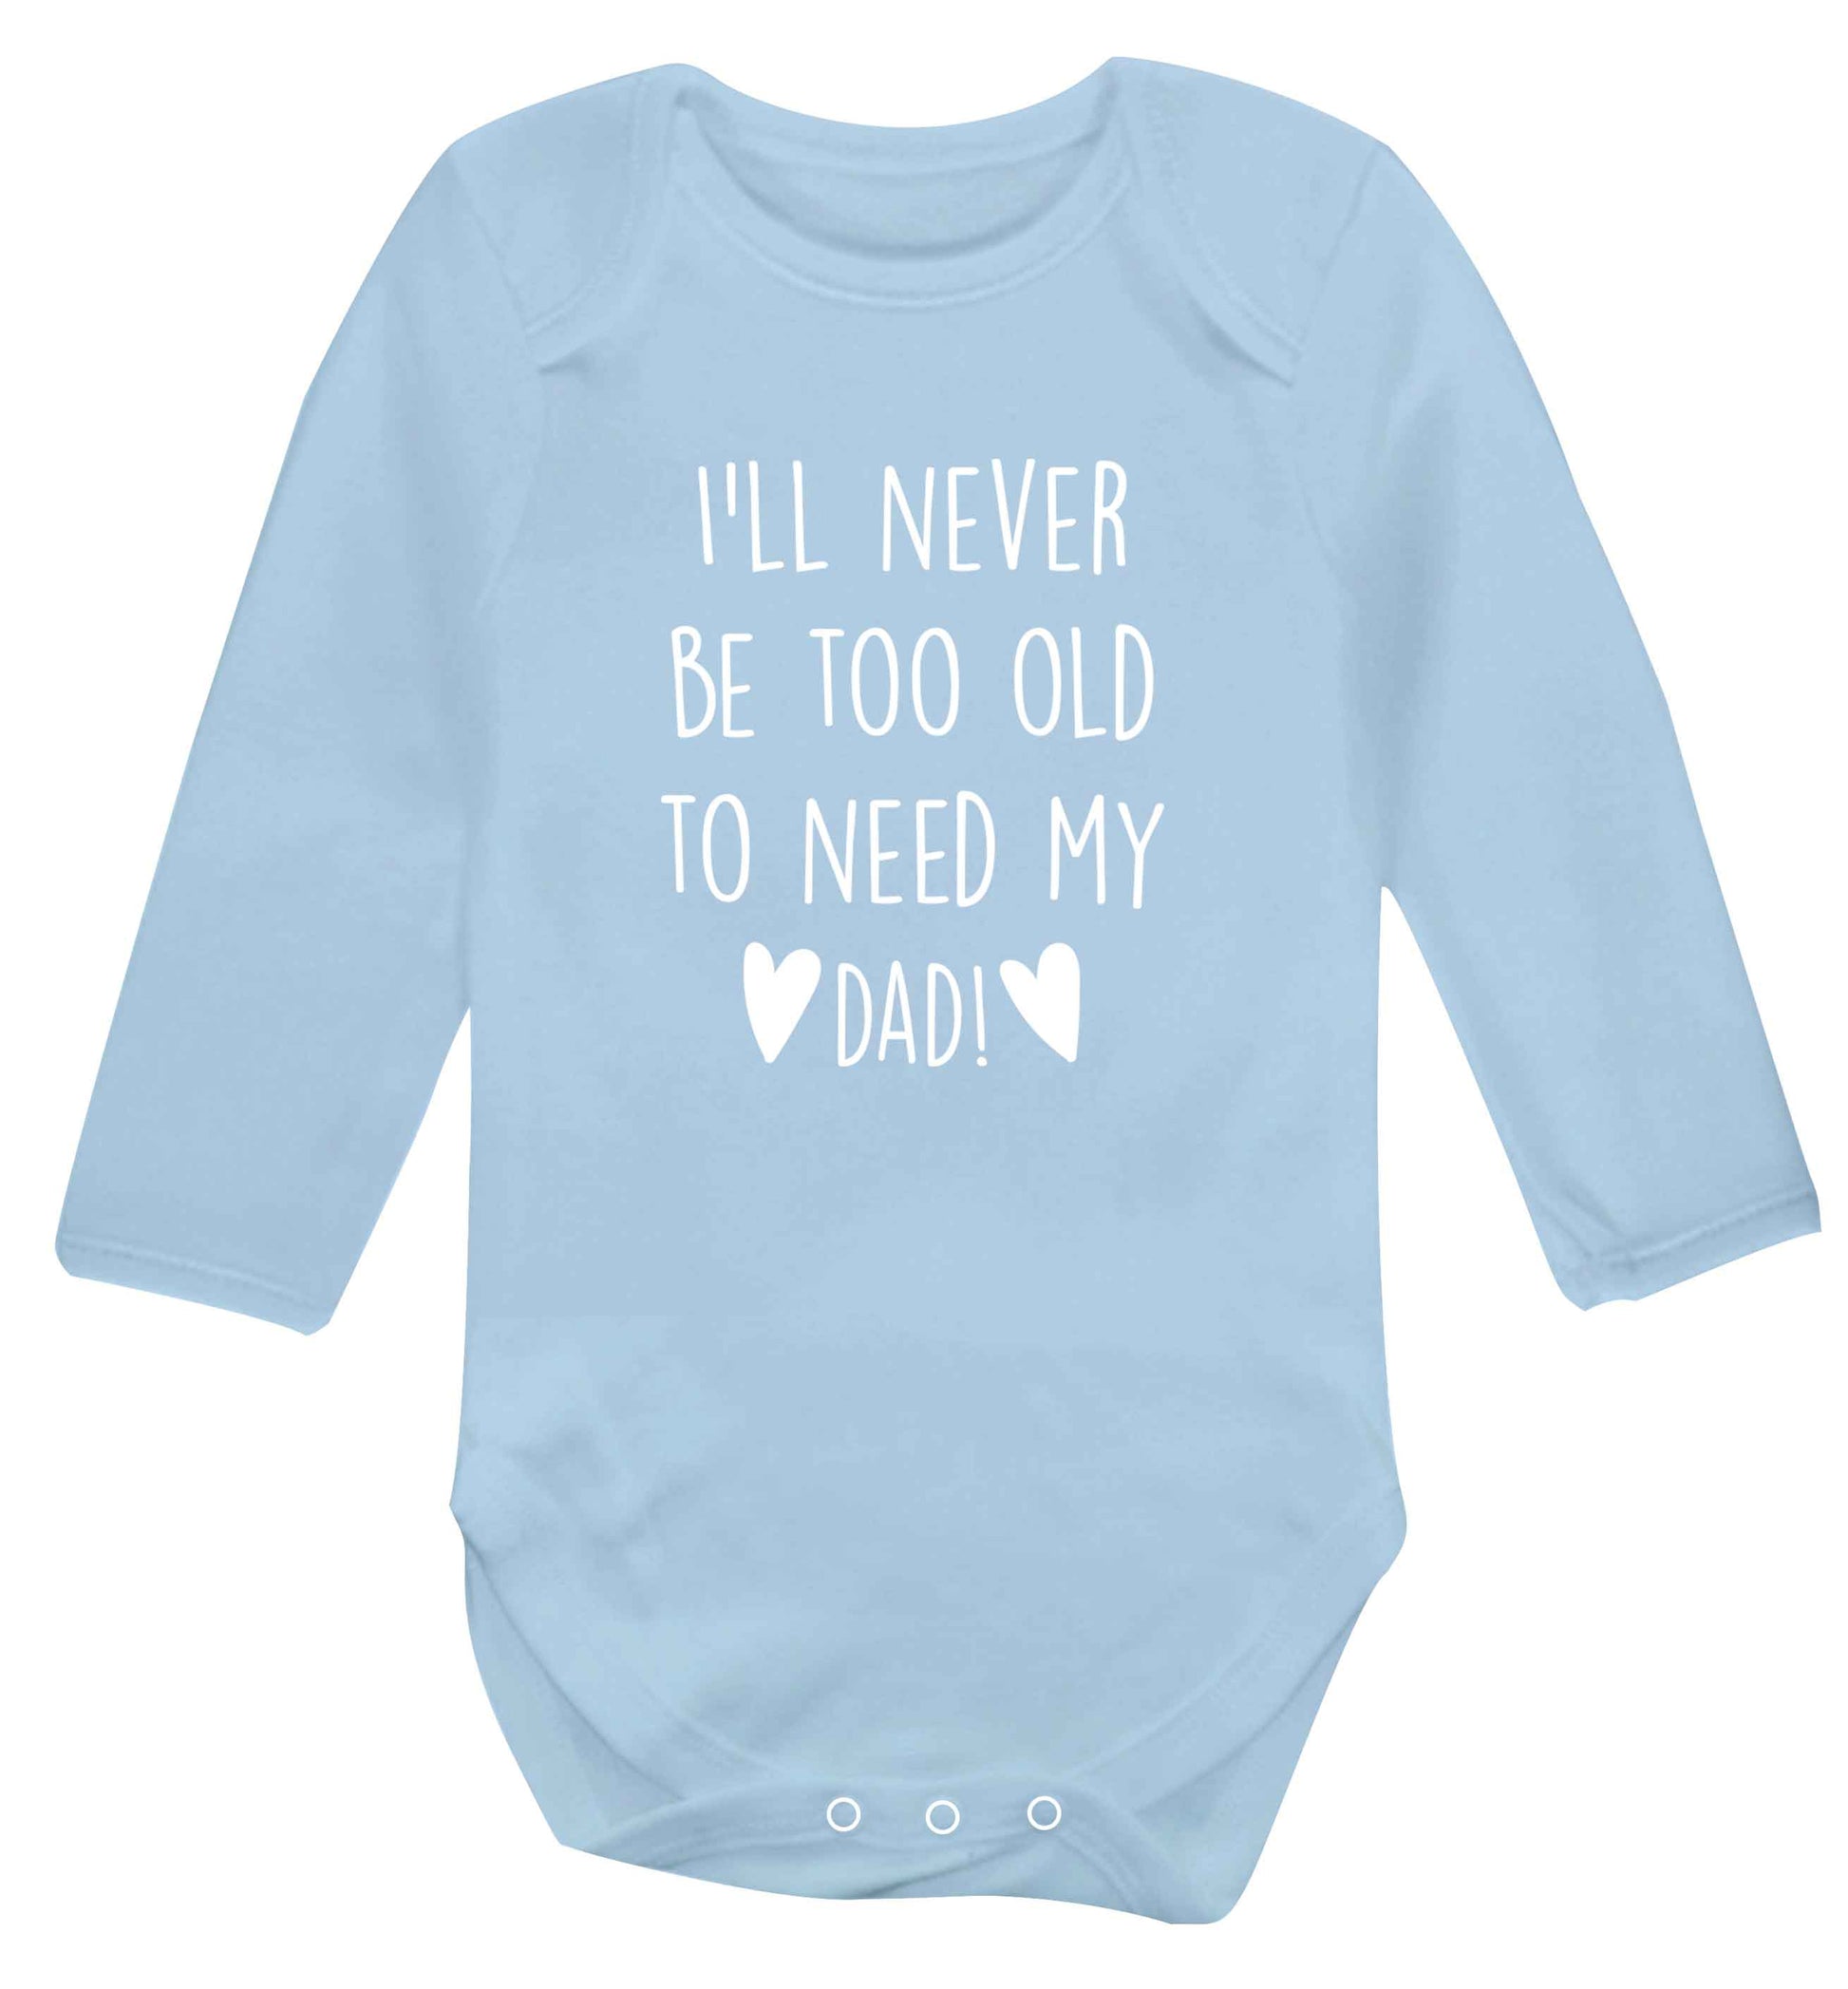 Everything I am you helped me to be baby vest long sleeved pale blue 6-12 months